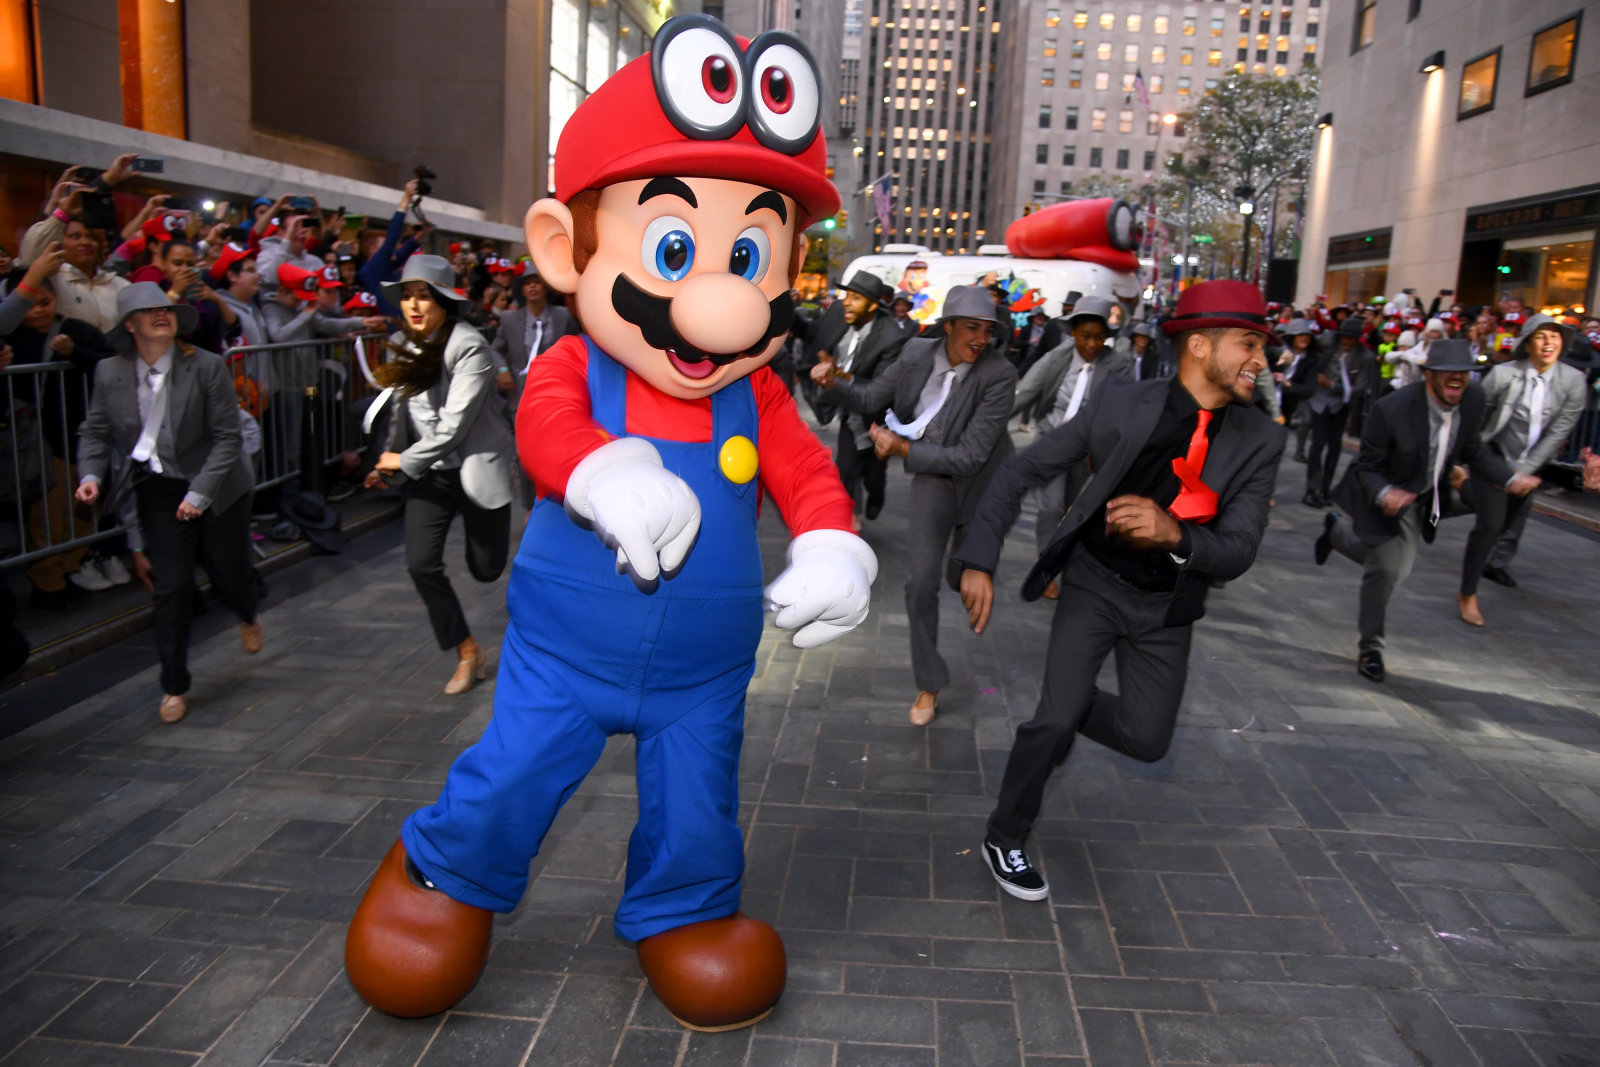 NEW YORK, NY - OCTOBER 26:  Mario and Jordan Fisher, actor, recording artist and current contestant on Dancing with the Stars co-hosts the Super Mario Odyssey for Nintendo Switch launch event on October 26, 2017 at Rockefeller Plaza in New York City.  (Photo by Dave Kotinsky/Getty Images for Nintendo of America)